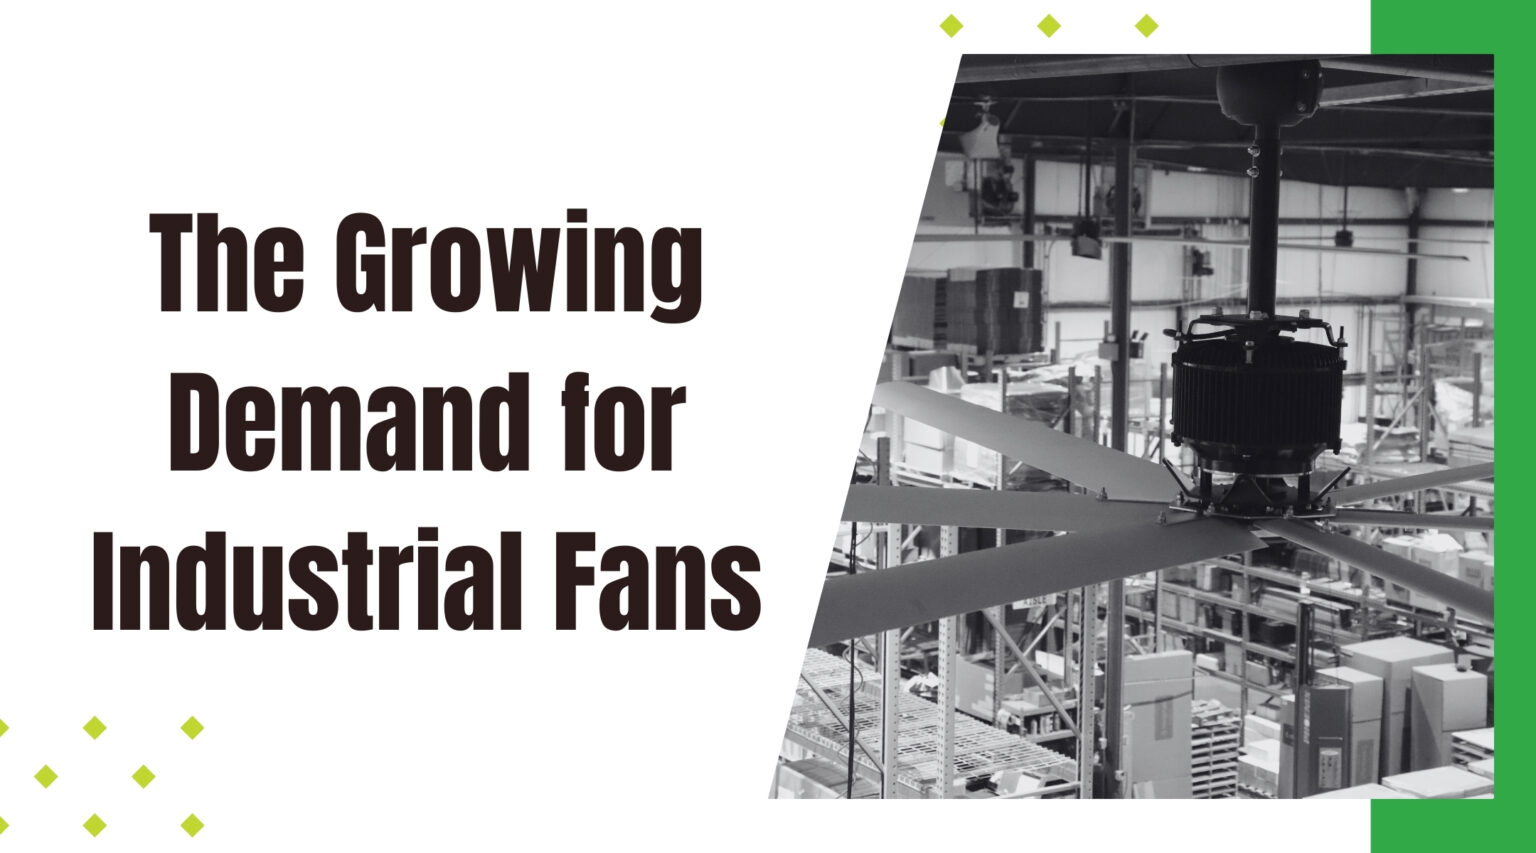 The Growing Demand for Industrial Fans